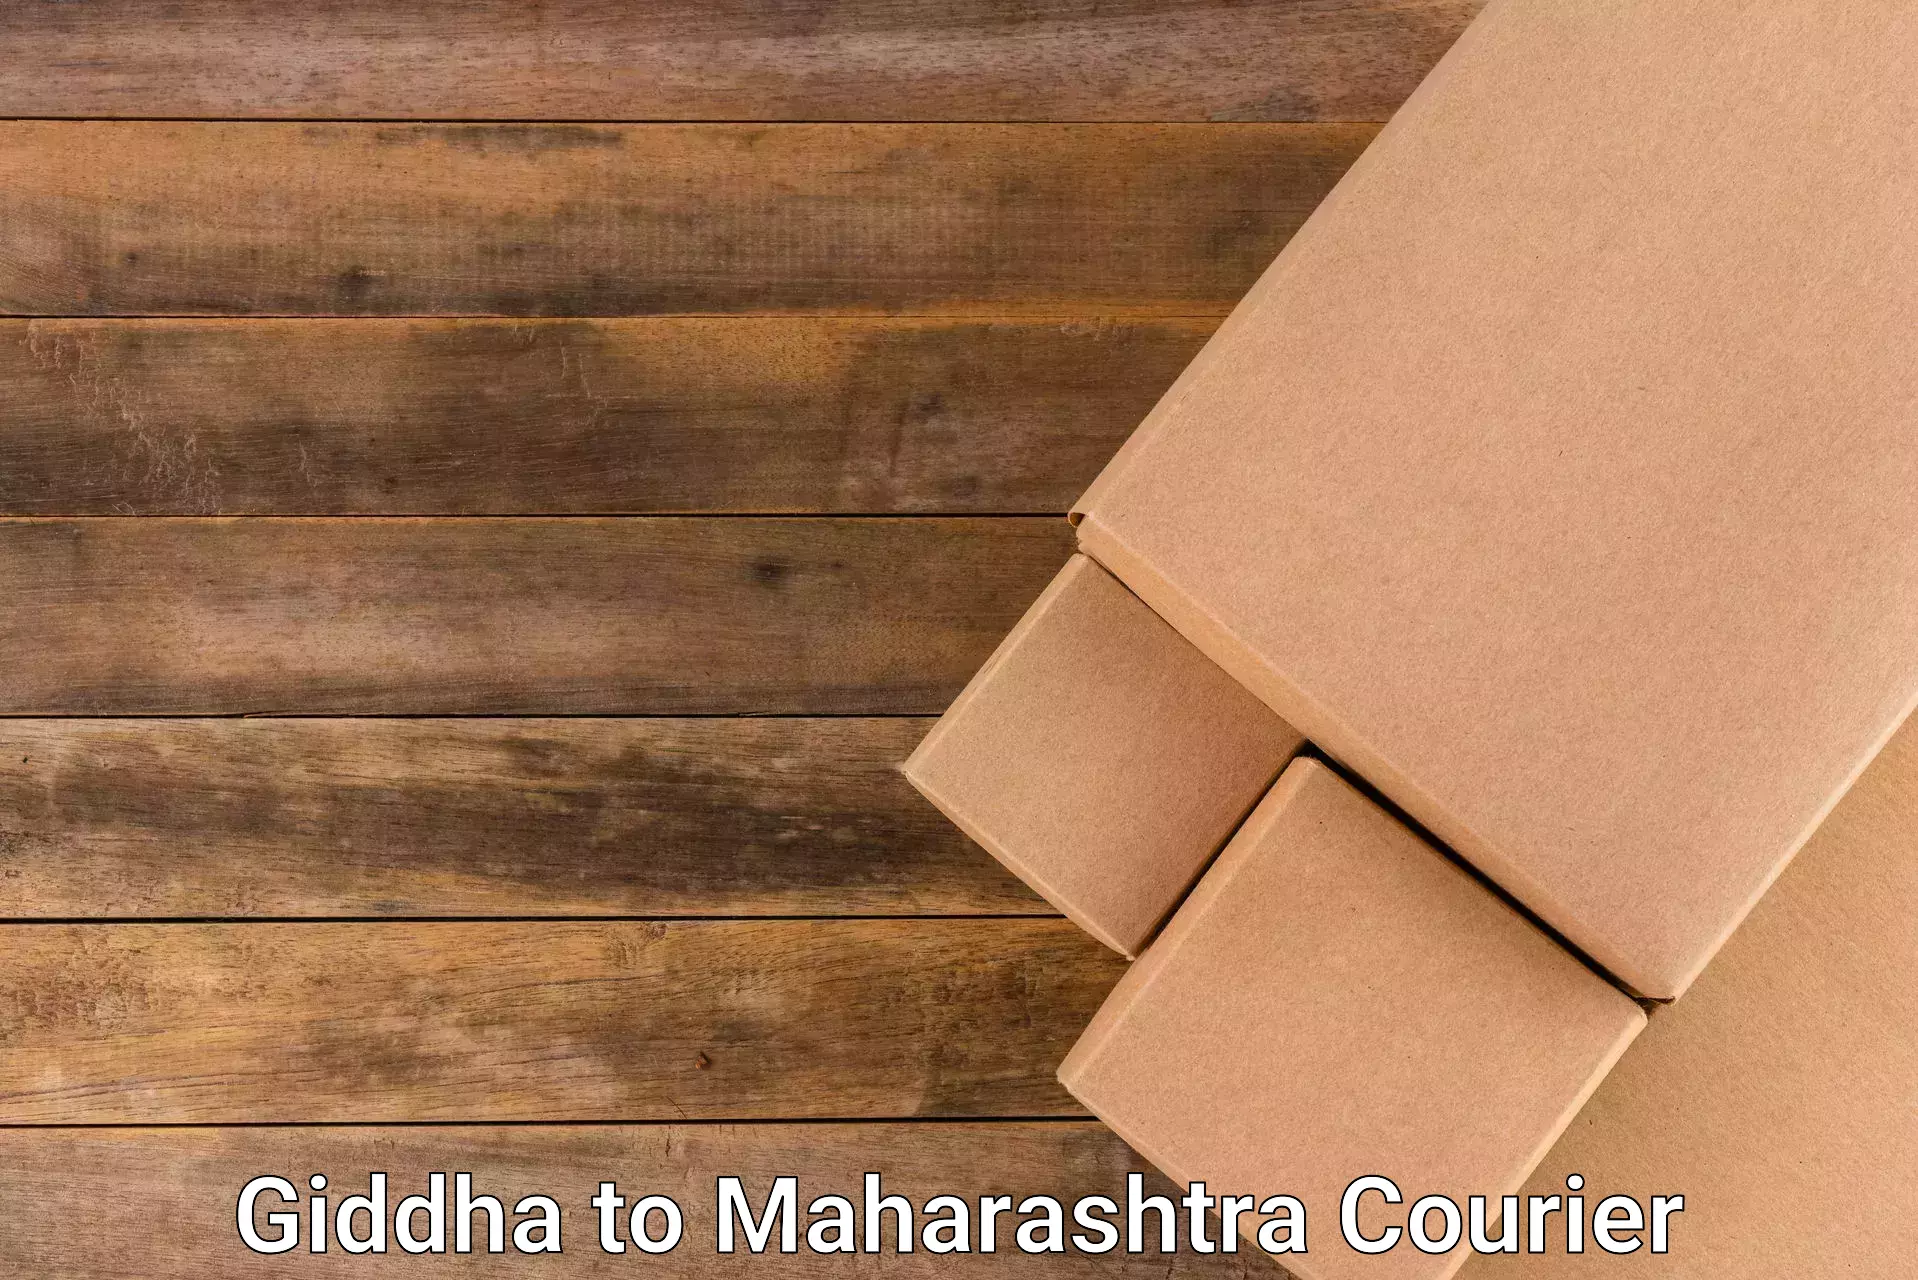 Courier service innovation in Giddha to Maharashtra